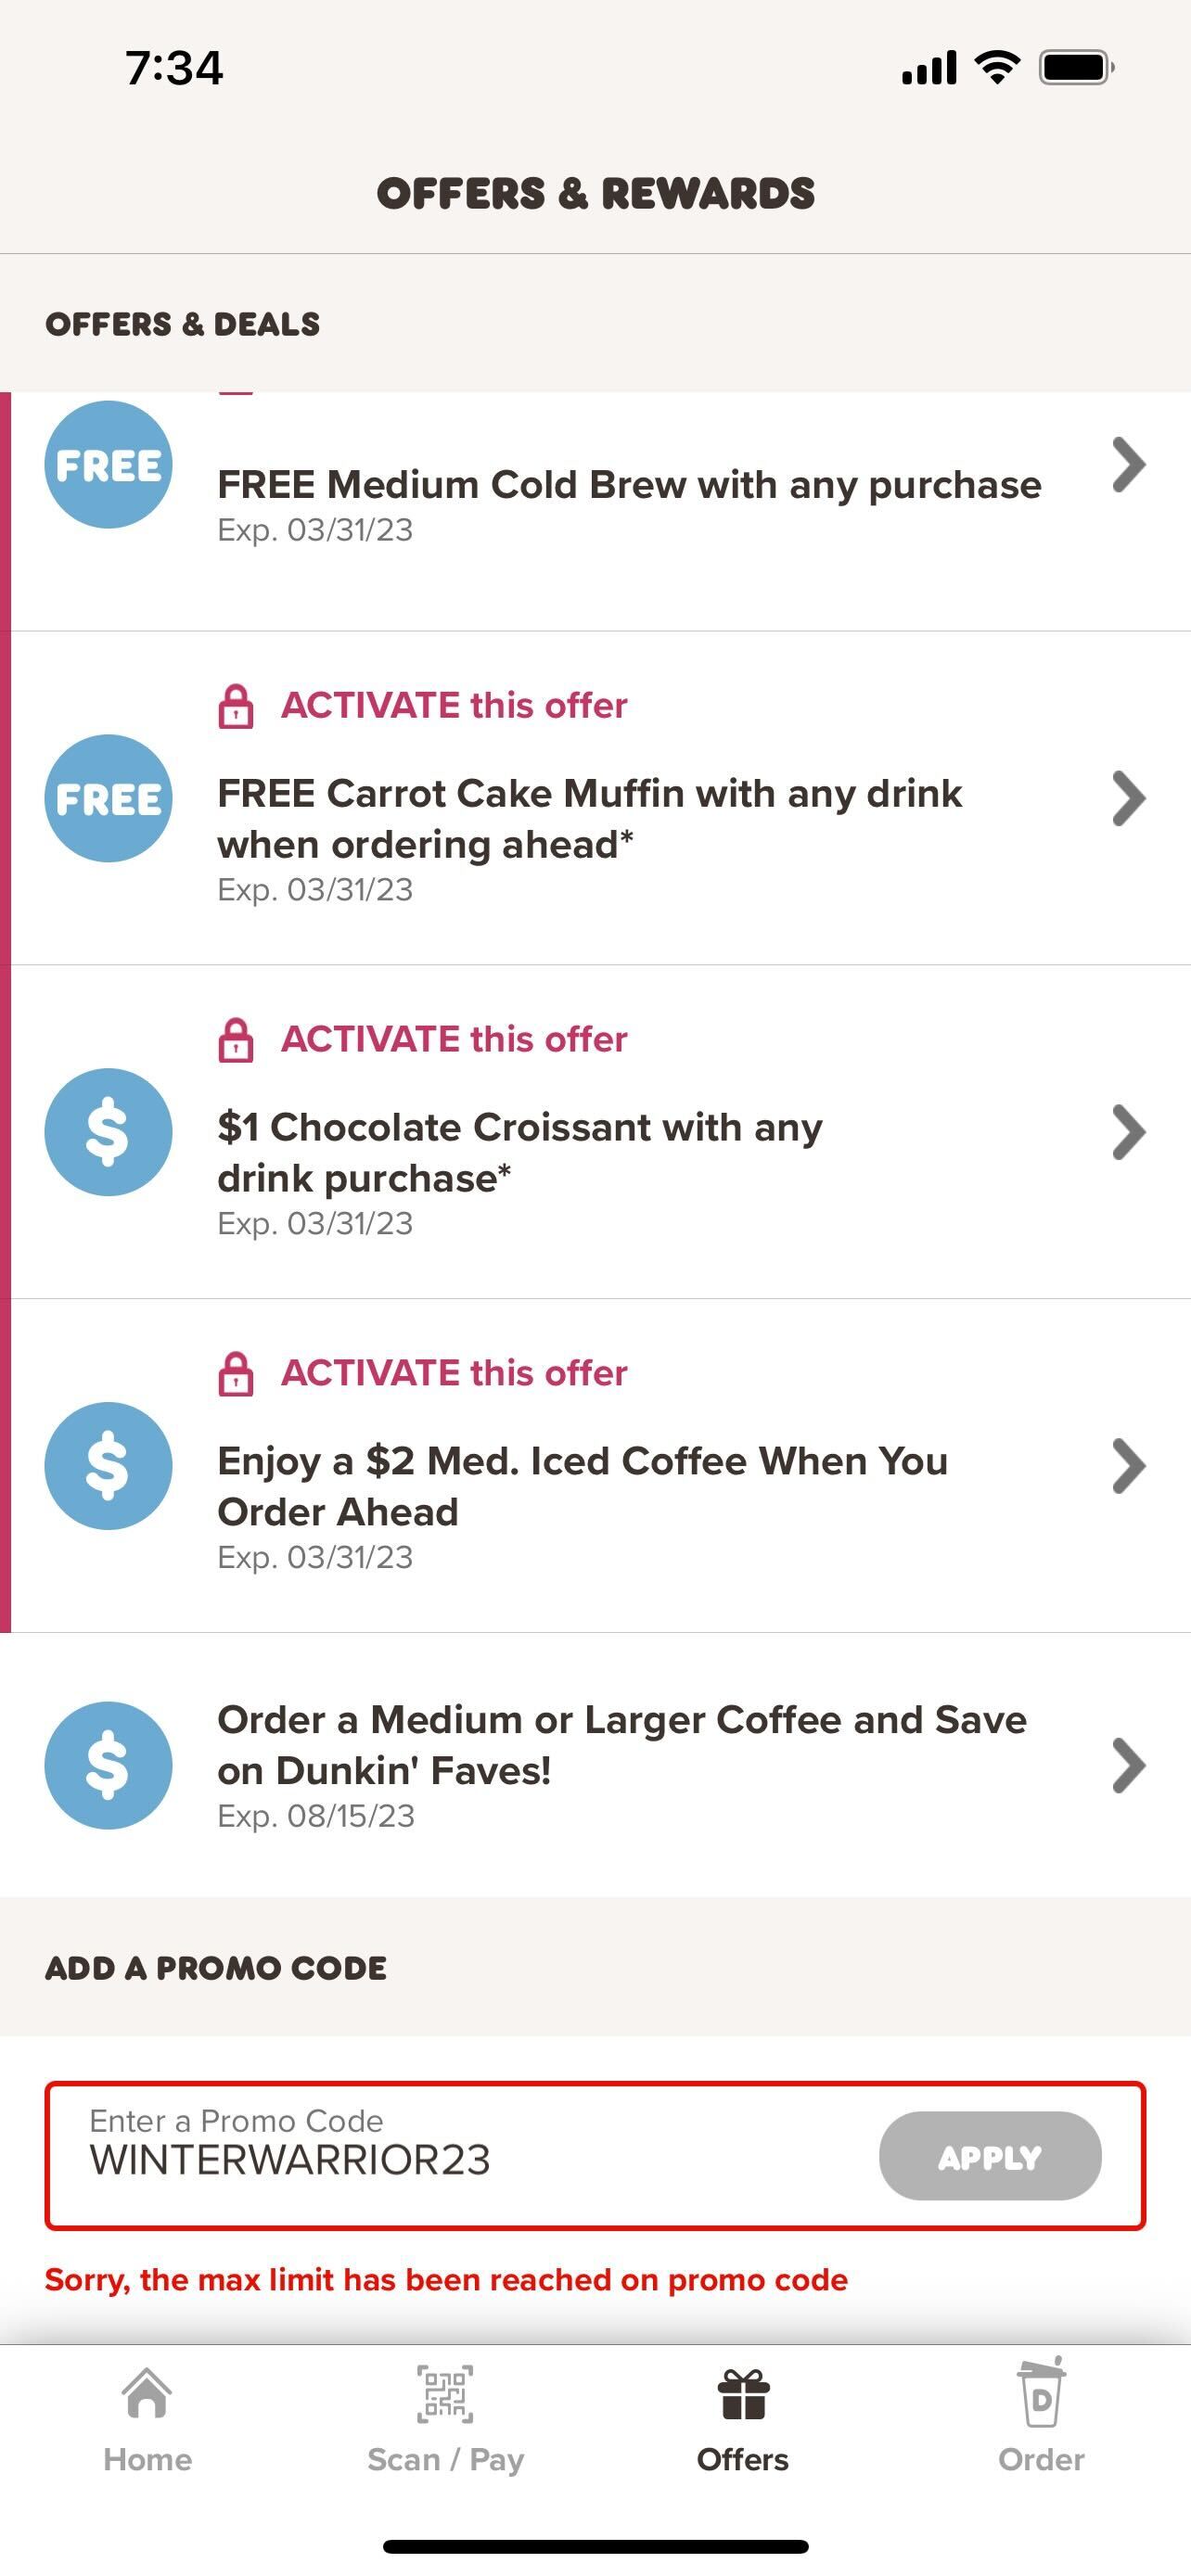 Dunkin' offers free iced coffee, but here's why you can't get it 